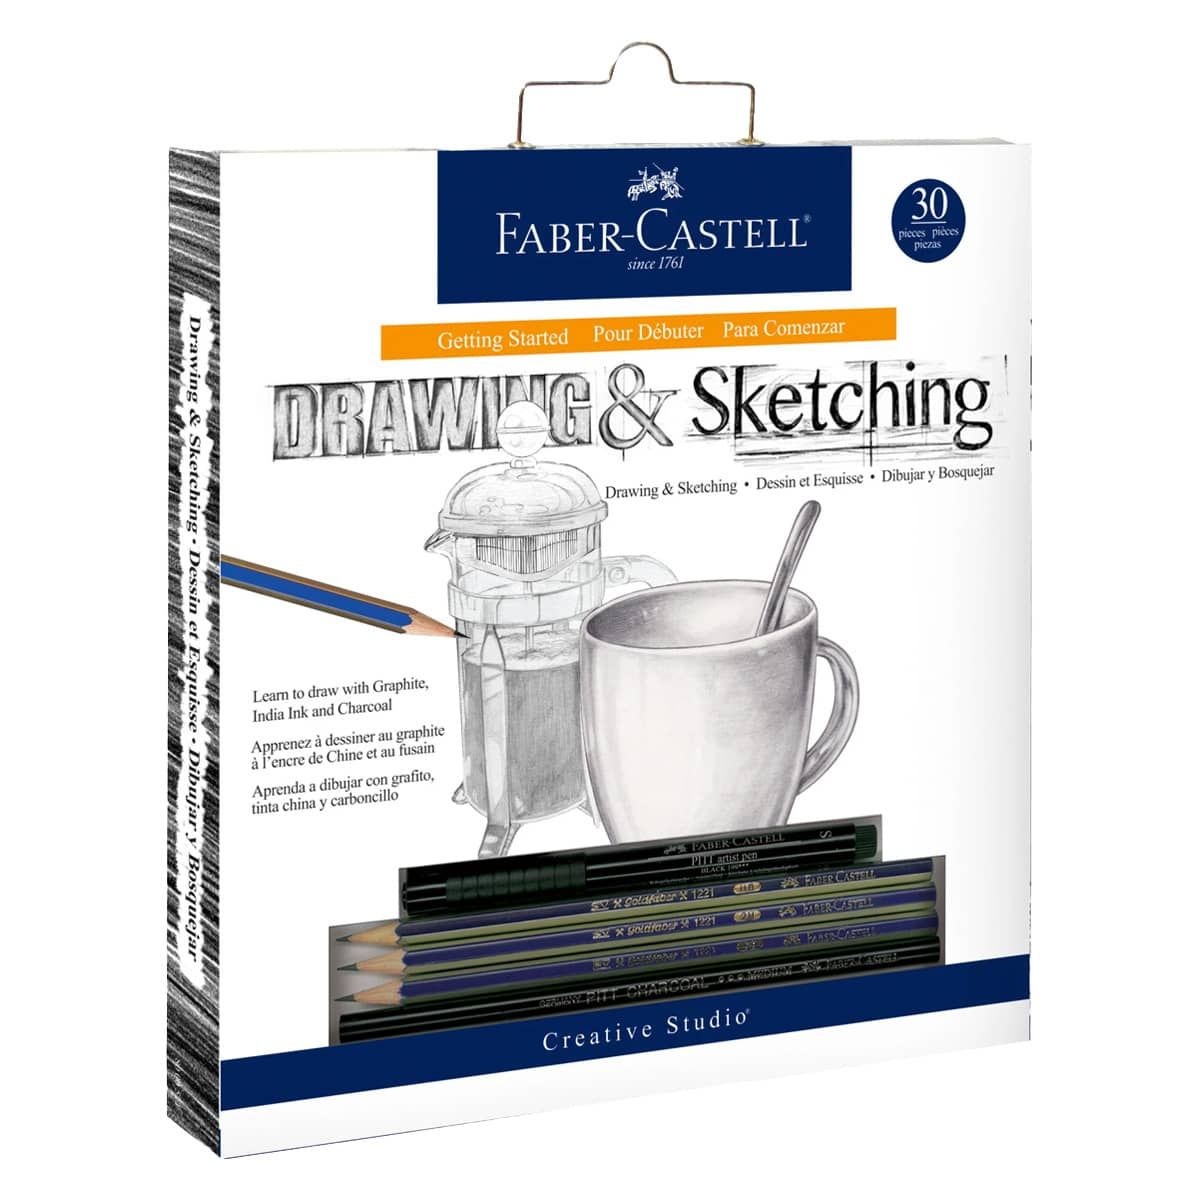 Faber-Castell Getting Started Drawing & Sketching Set